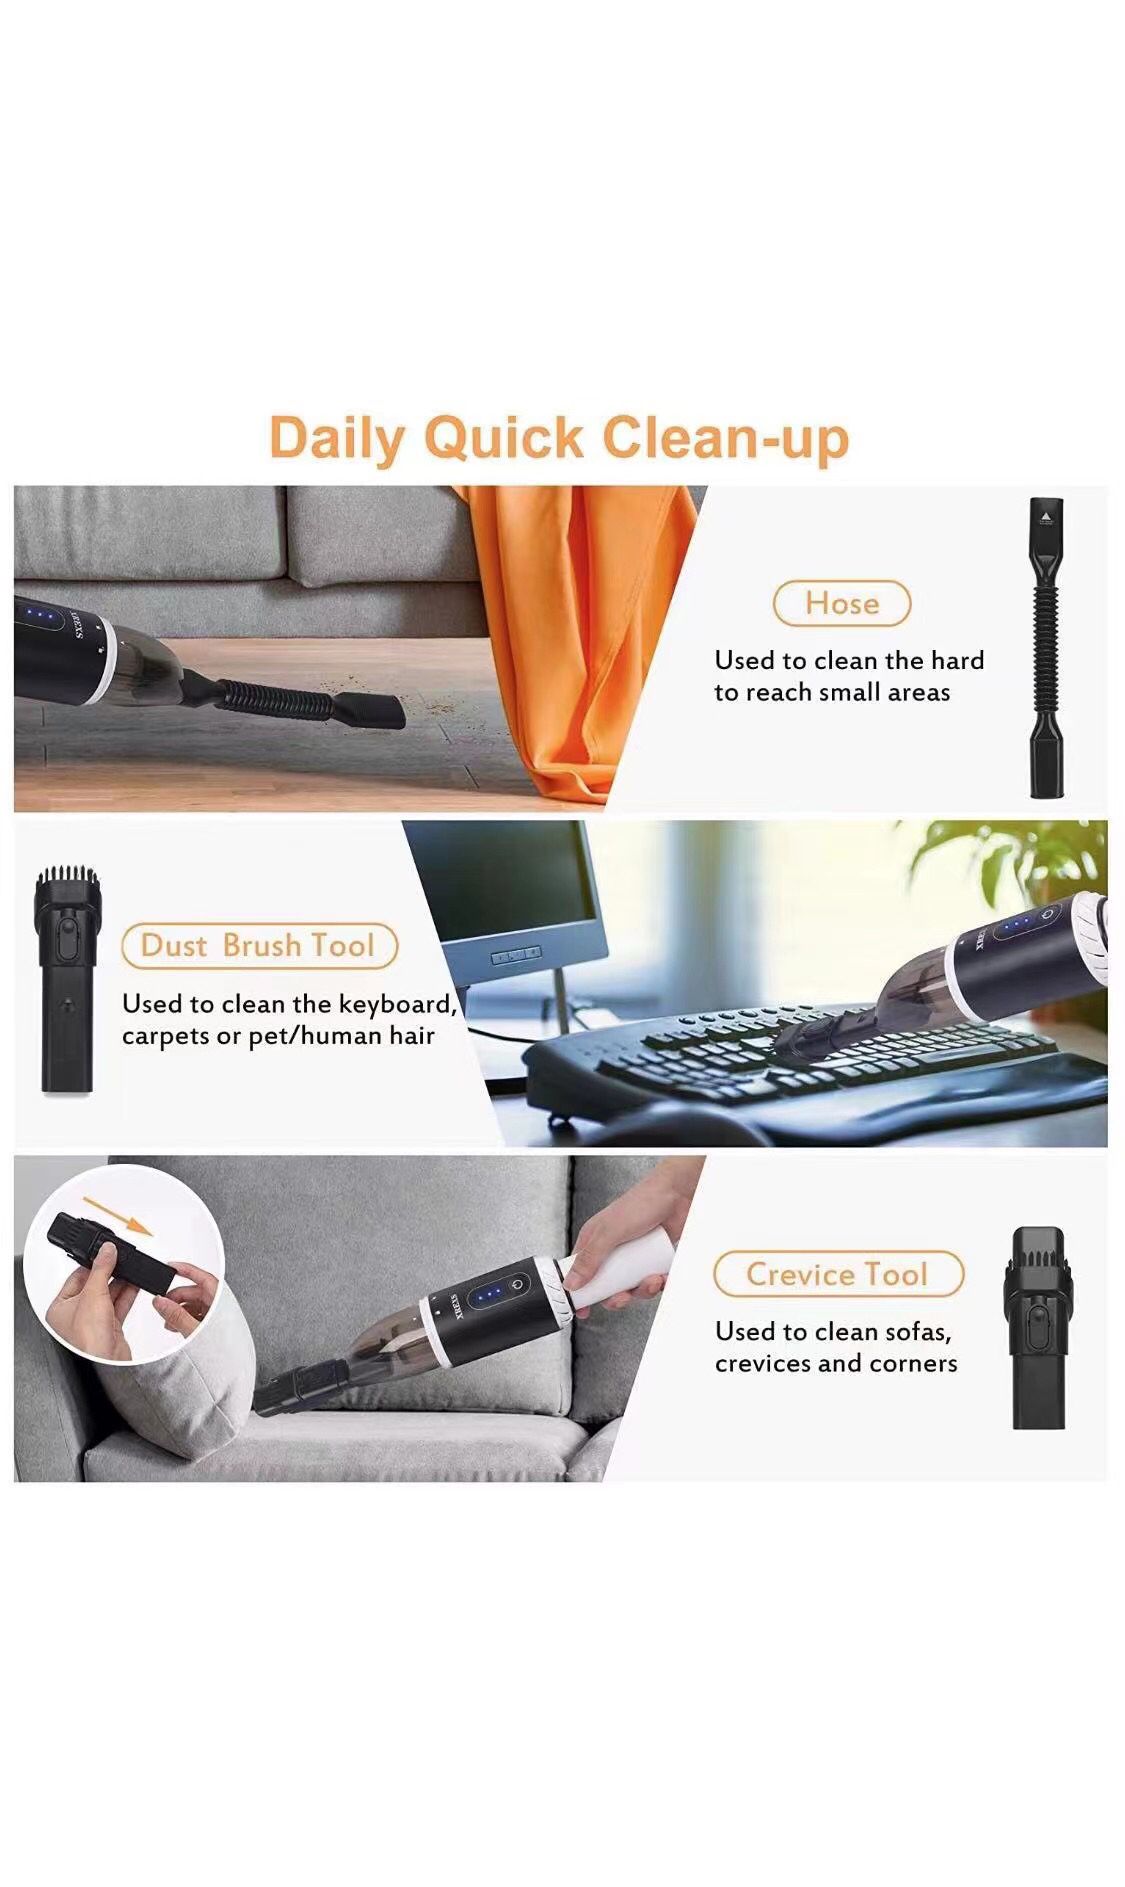 Handheld Vacuum Cordless, Portable Hand Held Car Vacuum Cleaner with High Power, Rechargeable Mini Vacuum for Home Office Pet Hair Cleaning, 8000Pa St